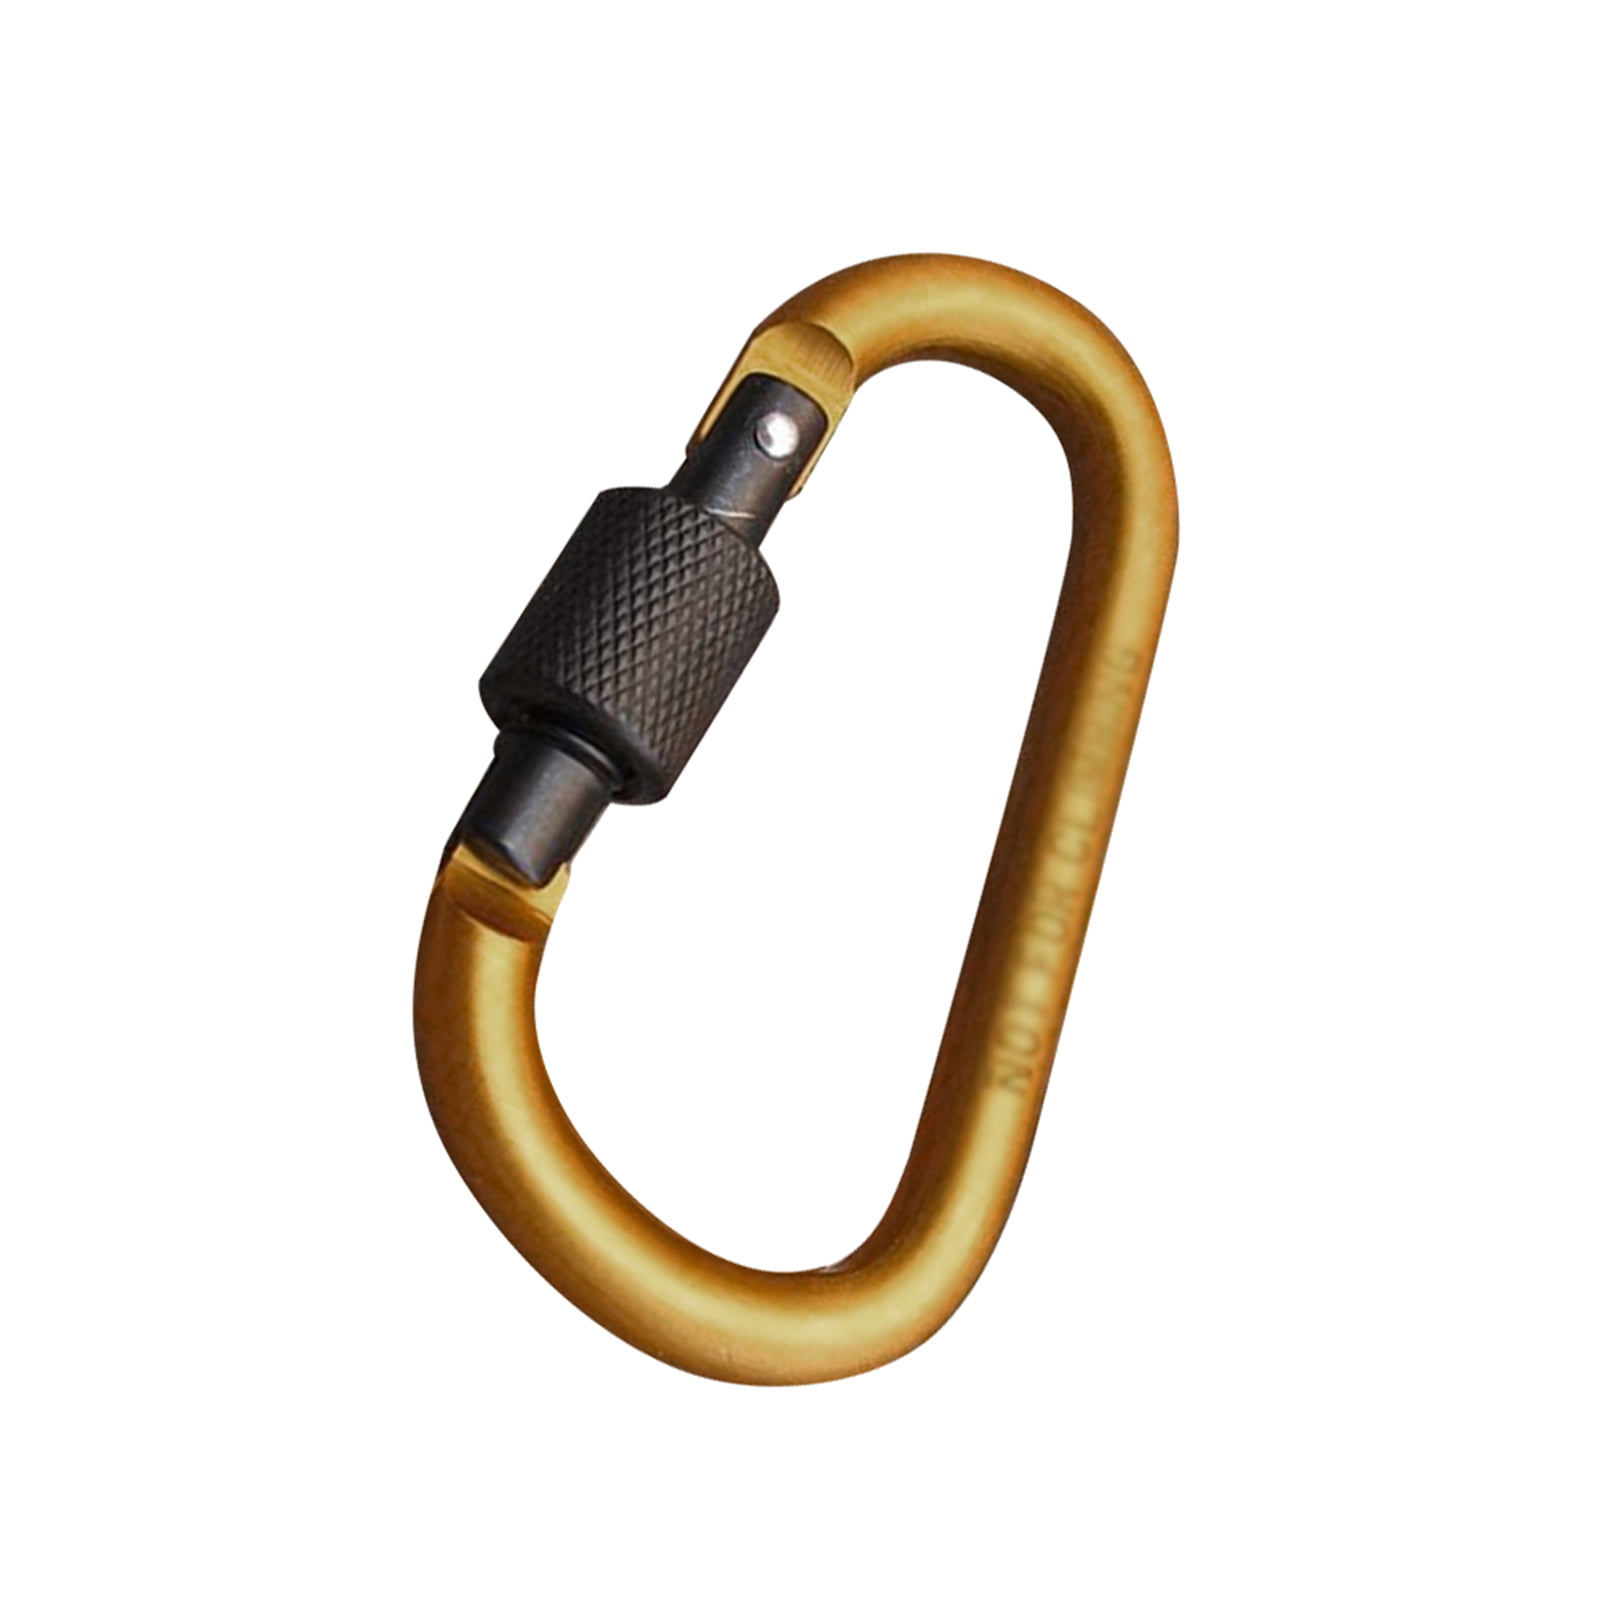 Aluminium Spring Clip Carabiner Hook For Climbing Quickdraw Equipment Details about   1-2pcs 